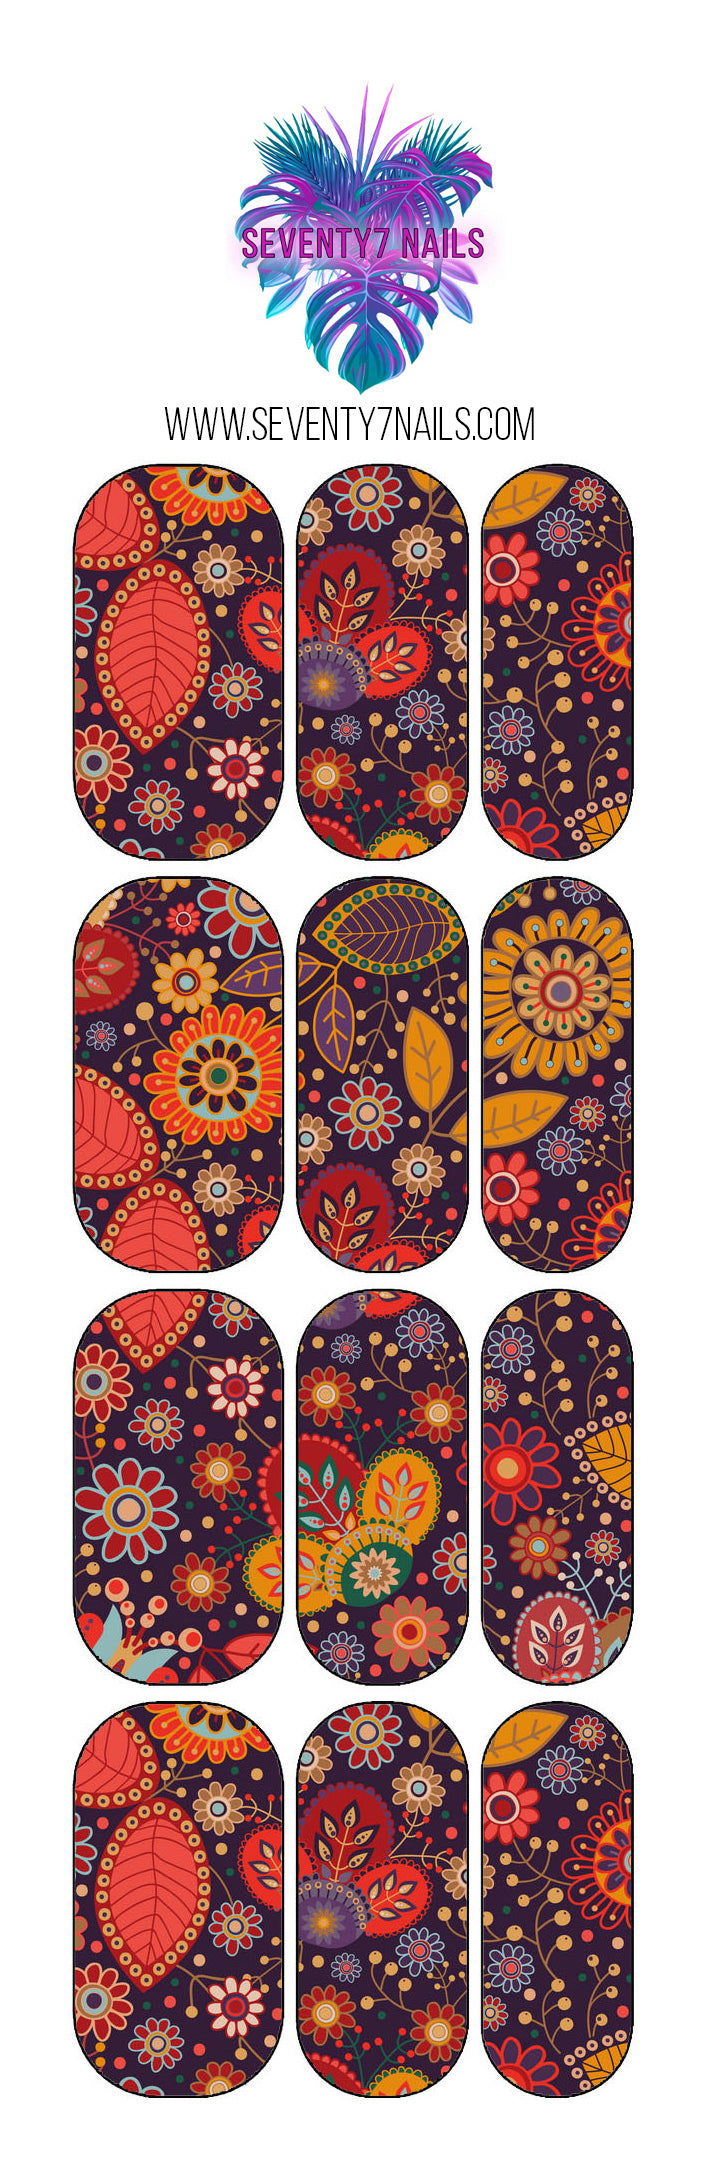 Waterslide Nail Decals - It's Fall